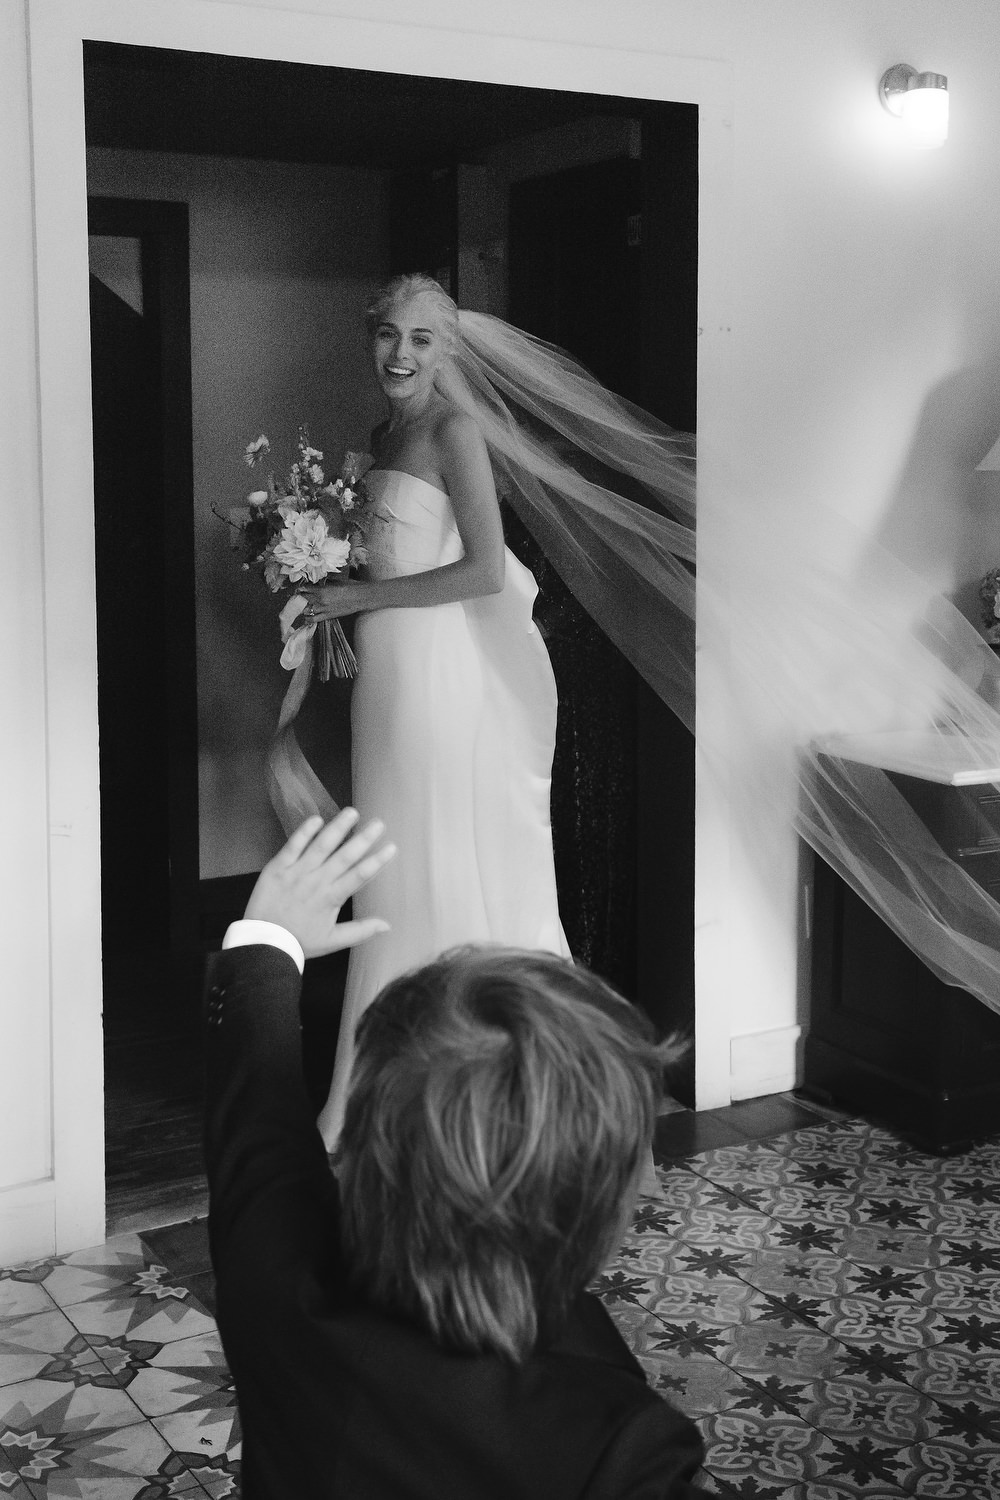 Little ring bearer smiling and waving at the bride, who looks down at him smiling with her cathedral veil flowing out behind her. Editorial Wedding at Firefox Mountain House in Upstate New York. 